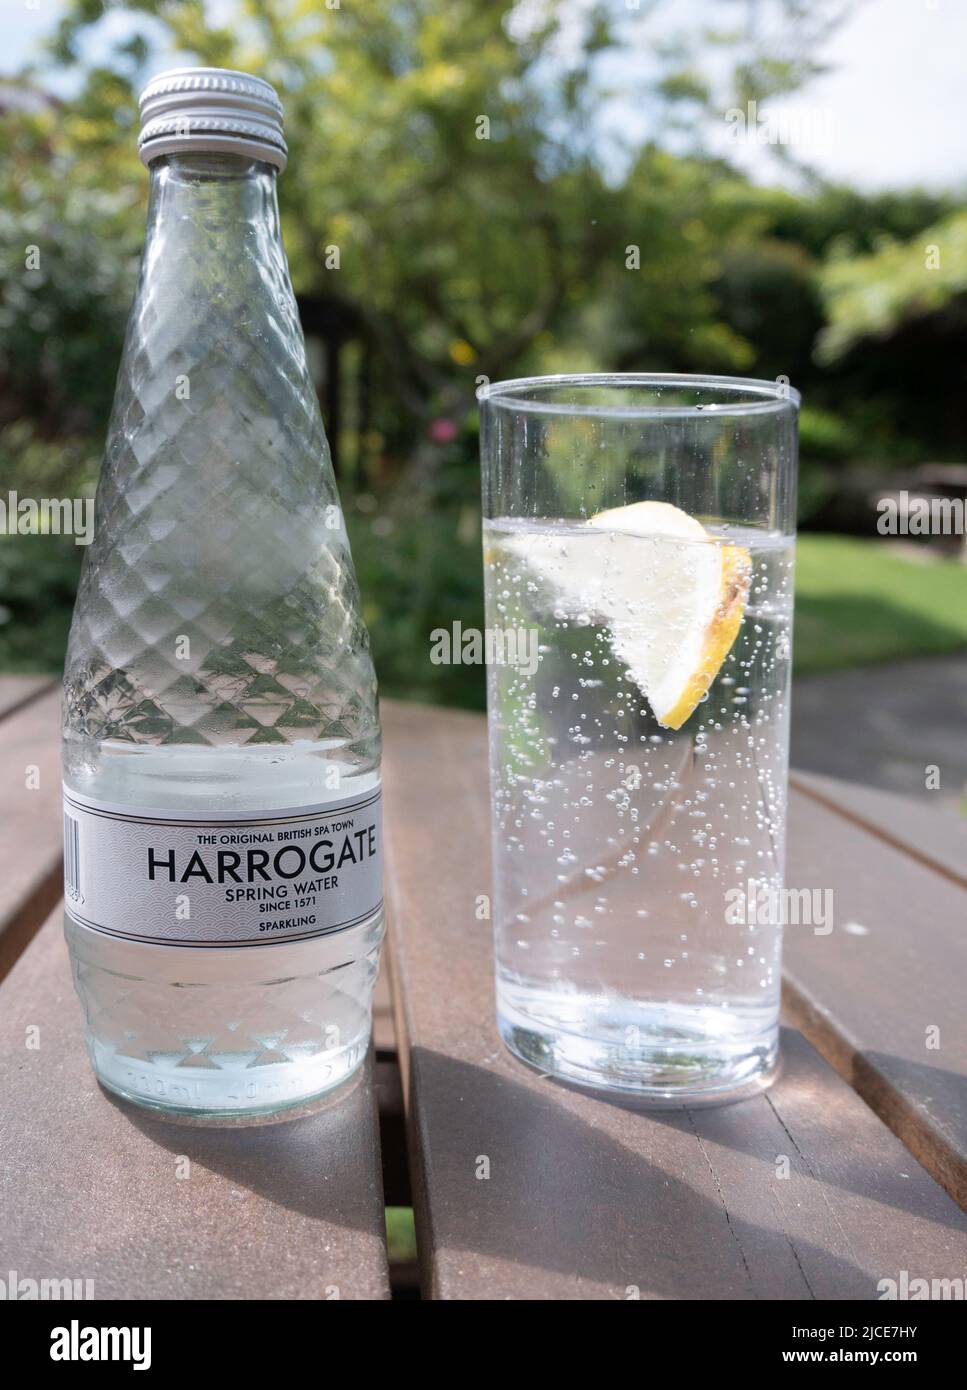 Harrogate Spa Sparkling mineral water, The Original British Spa Town Spring Water since 1571 bottle and glass with a slice of lemon  on an outside tab Stock Photo